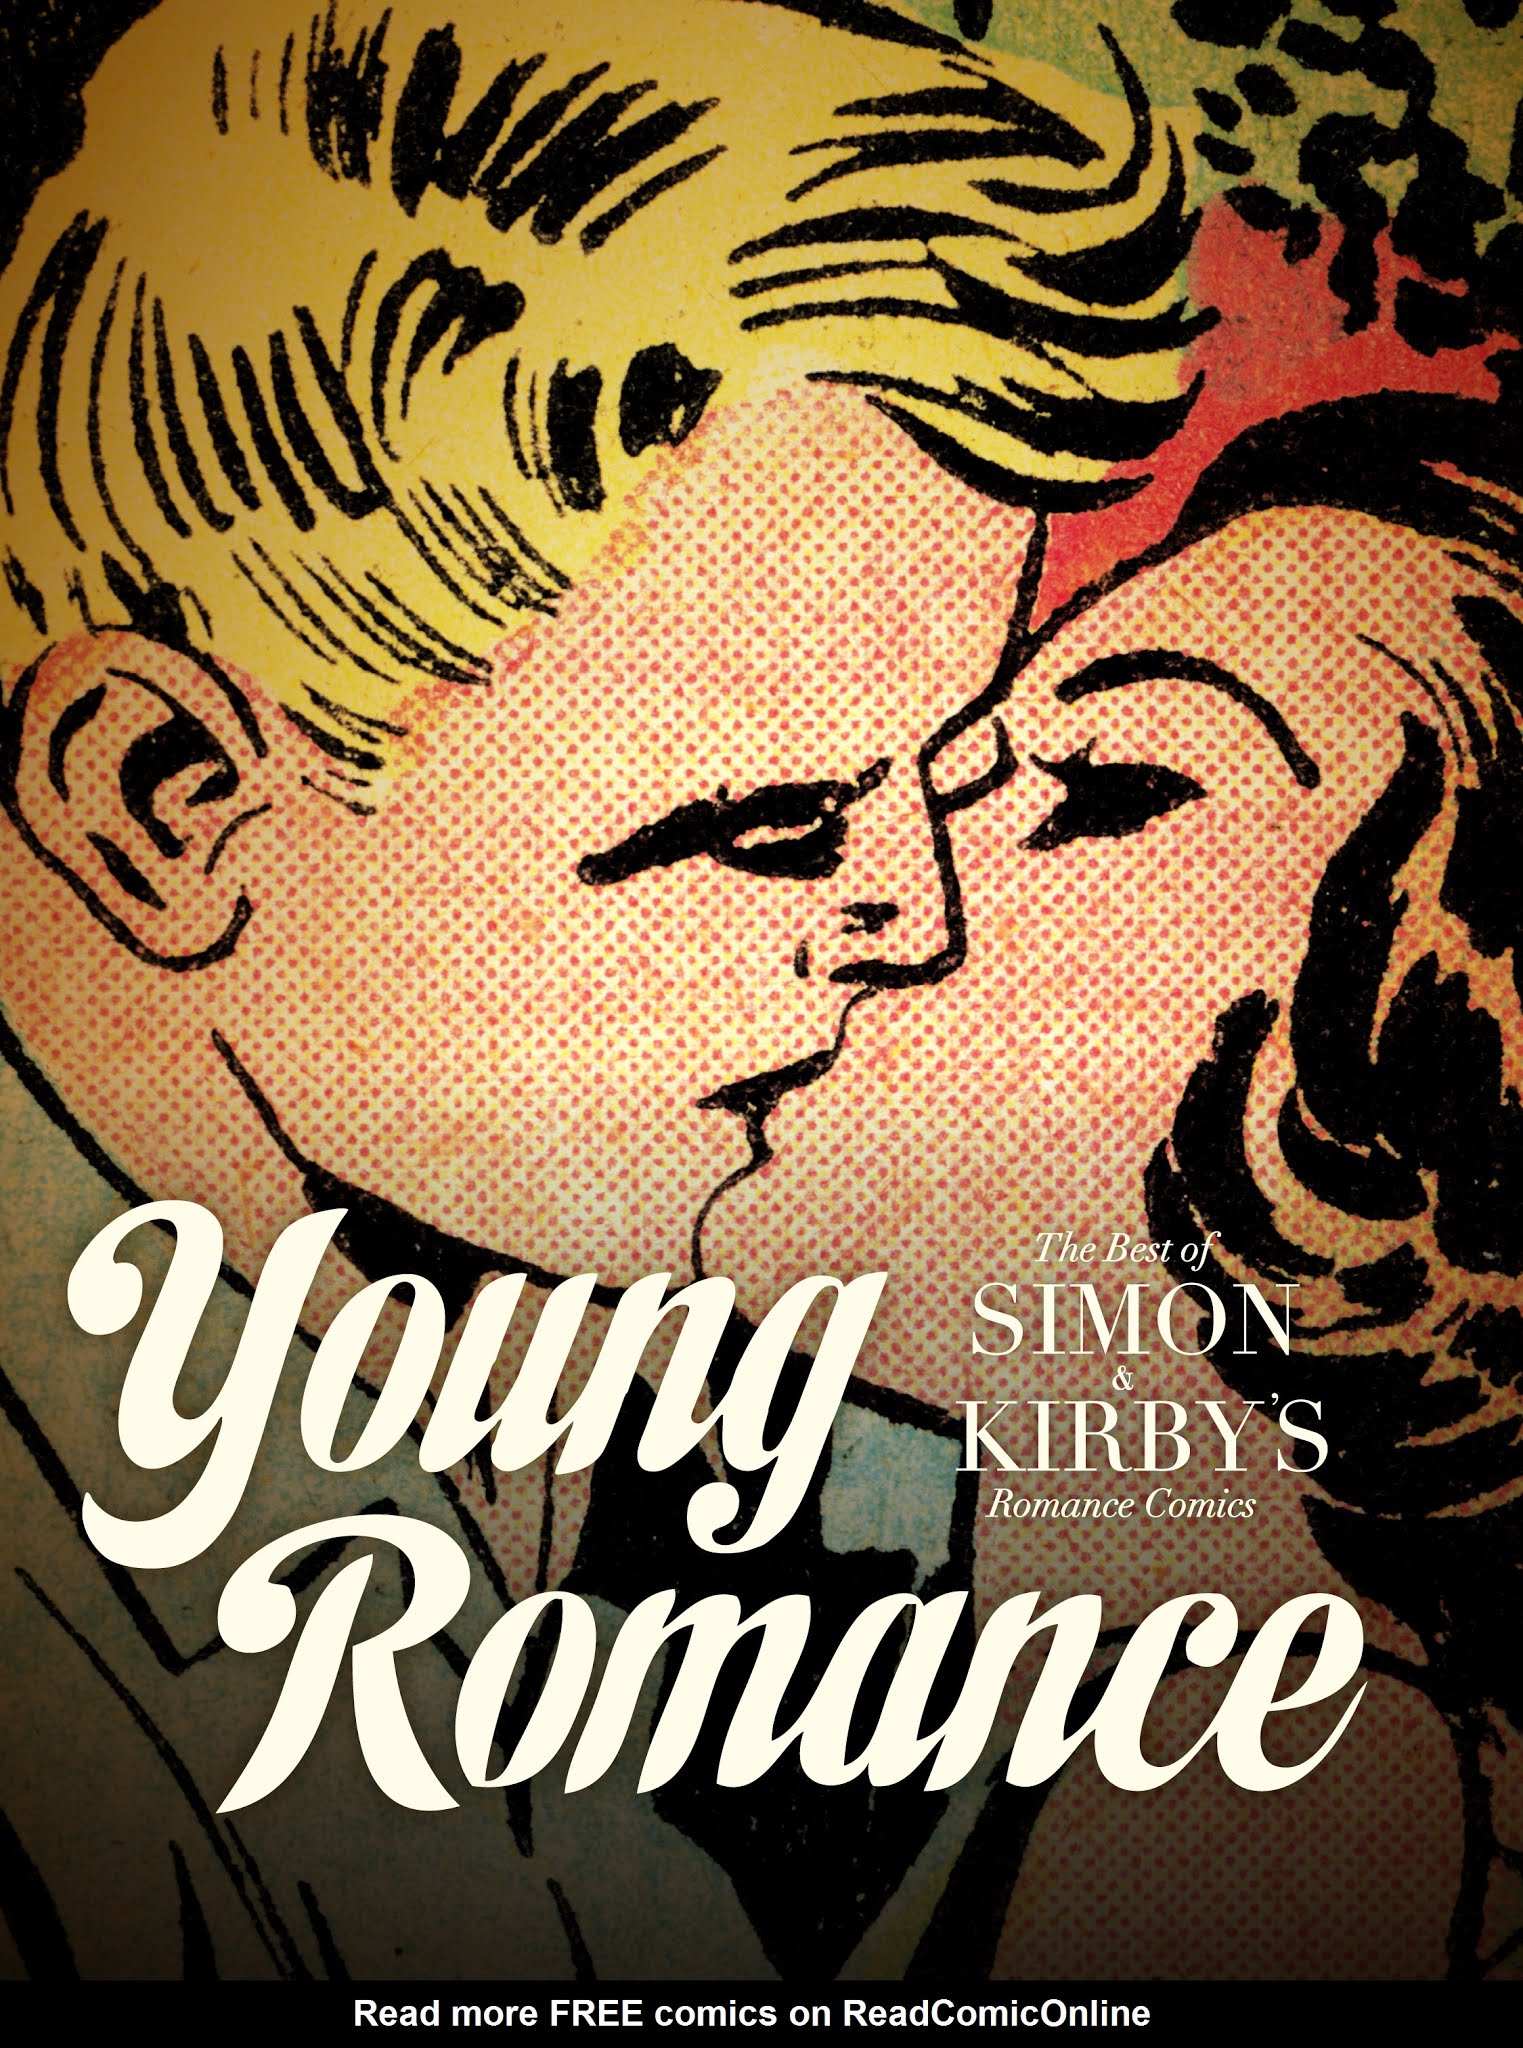 Read online Young Romance: The Best of Simon & Kirby’s Romance Comics comic -  Issue # TPB 1 - 1